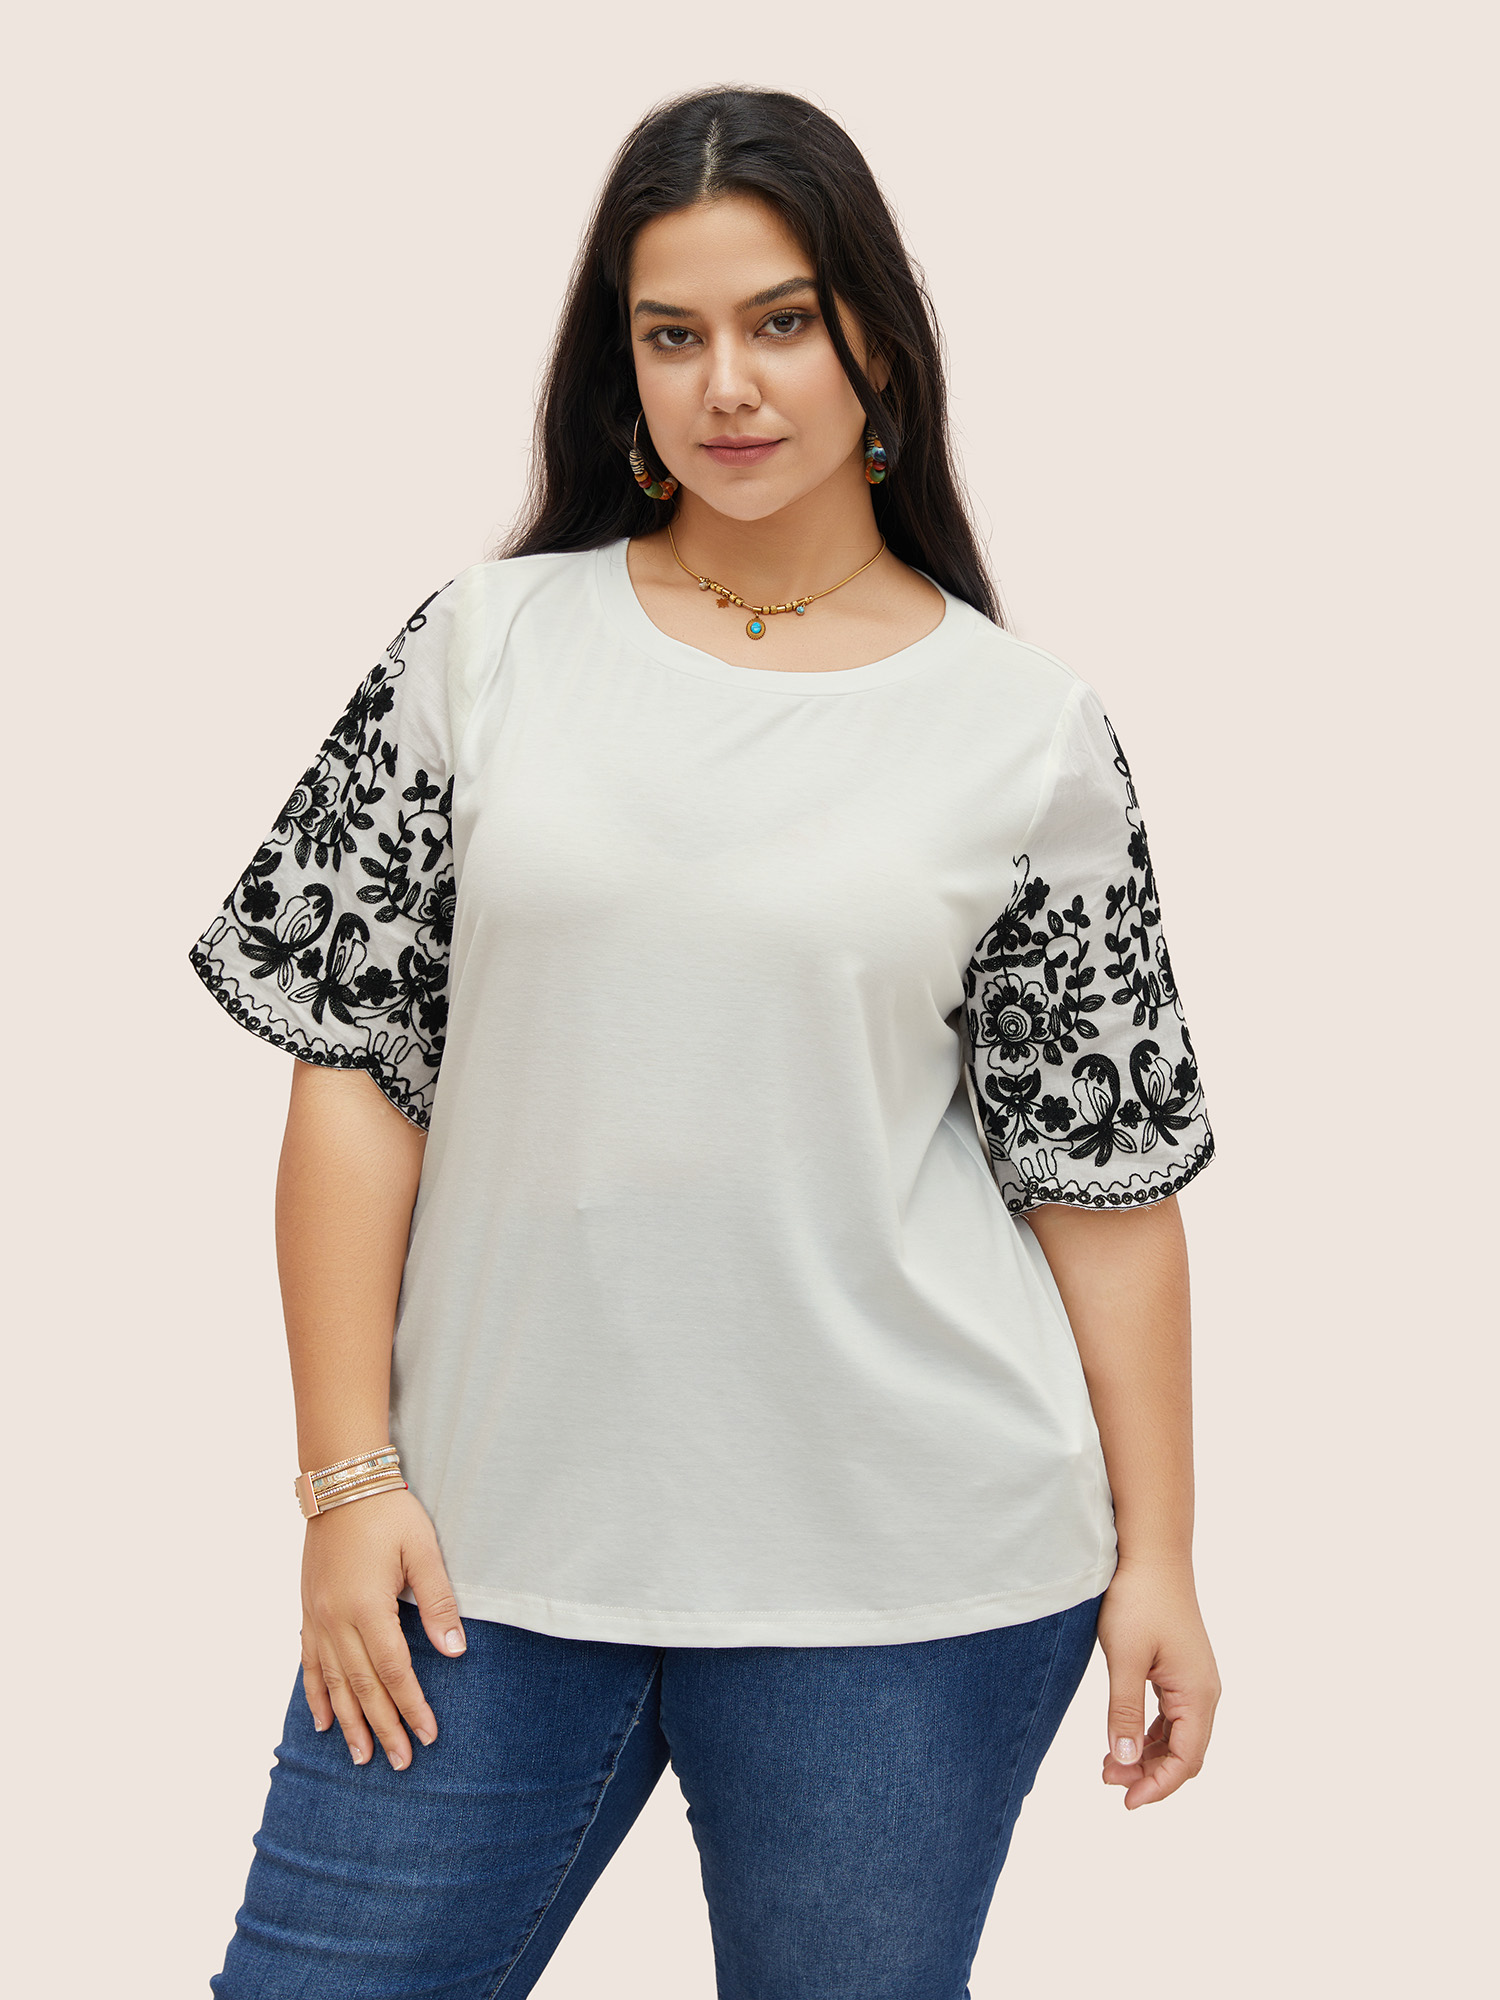 

Plus Size Round Neck Floral Embroidered Scalloped Trim T-shirt White Women Resort Contrast Round Neck Vacation T-shirts BloomChic